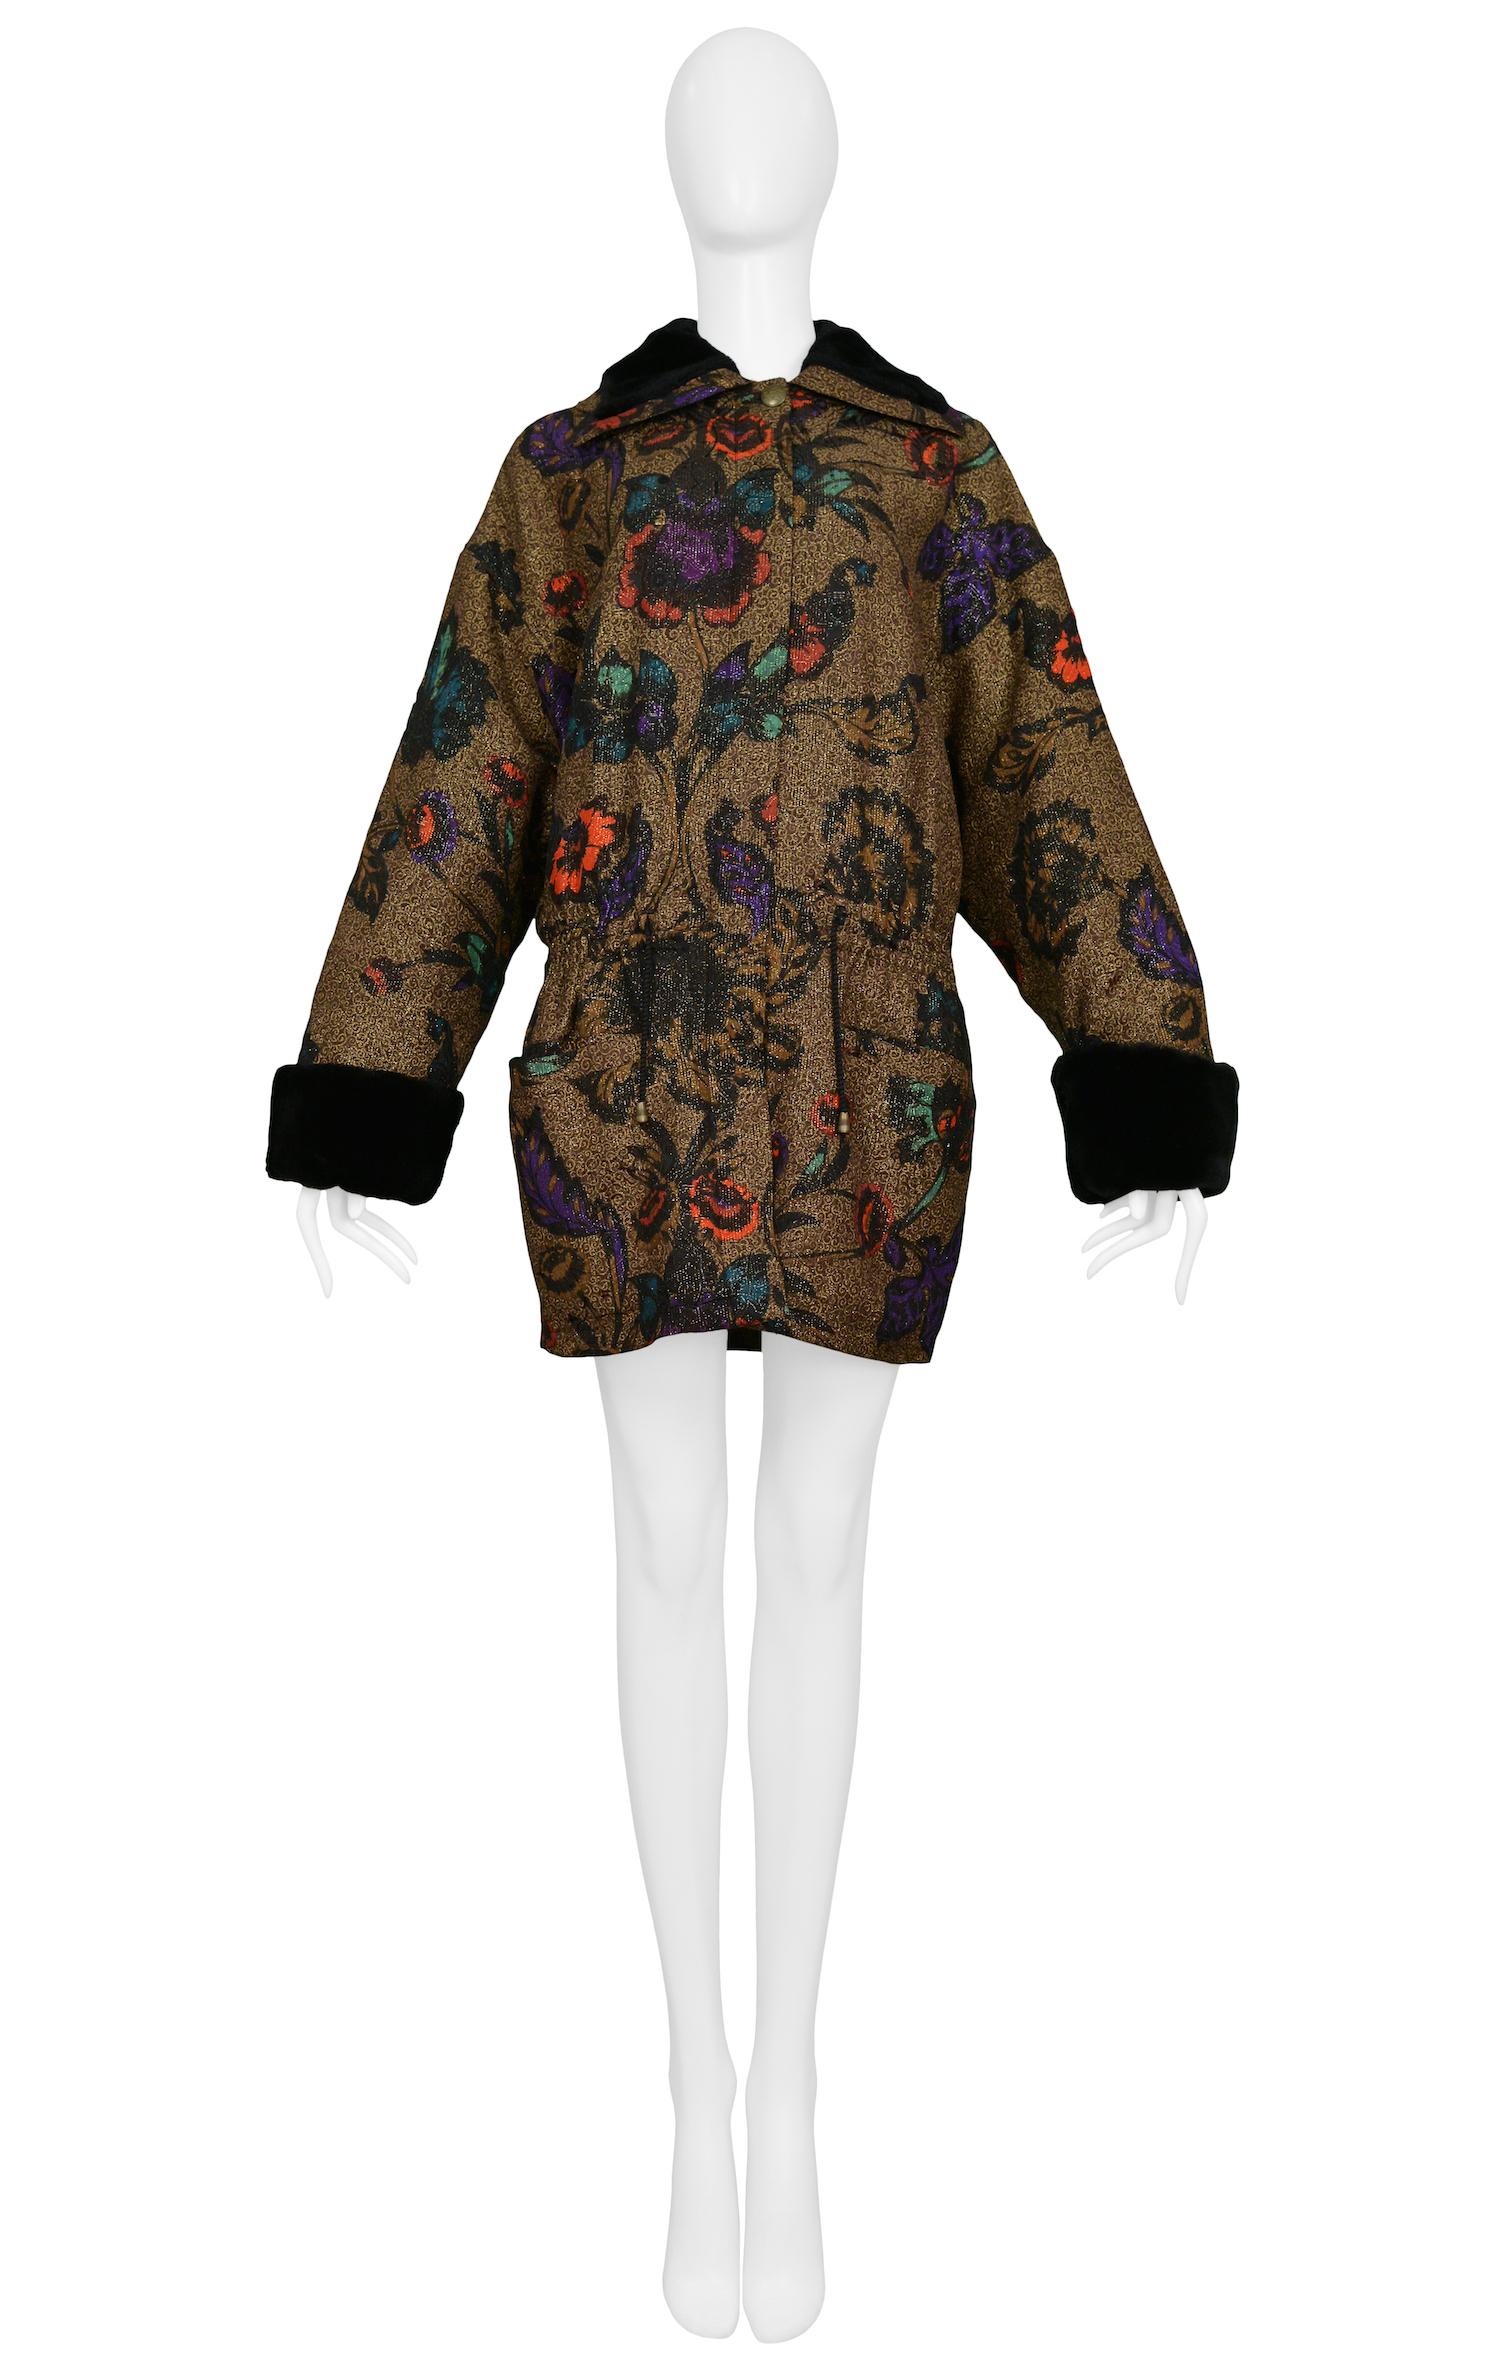 Vintage Gianni Versace gold metallic coat featuring an autumn floral print and black faux fur cuffs and collar.

Excellent Vintage Condition

Size 40